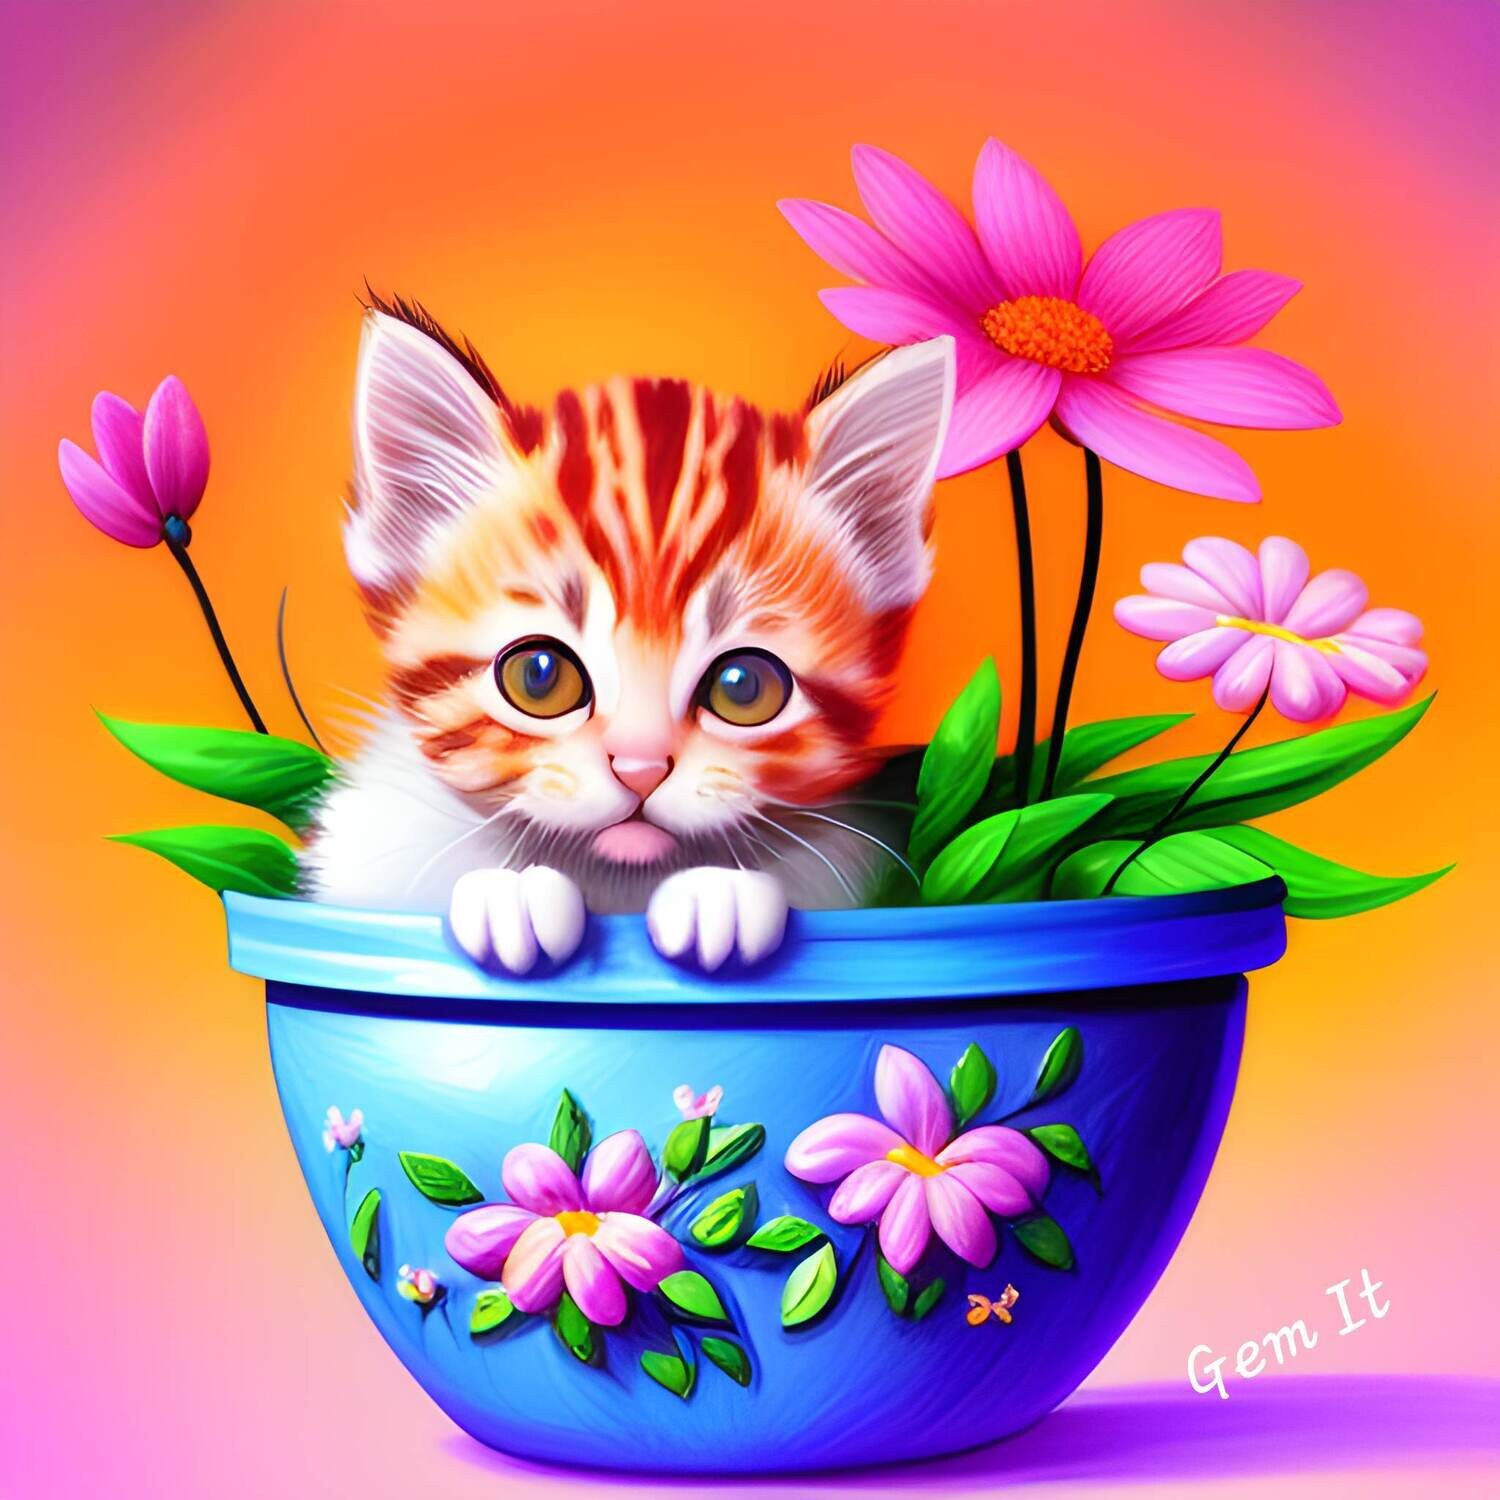 Potted Kitten 696 - Full Drill Diamond Painting - Specially ordered for you. Delivery is approximately 4 - 6 weeks.